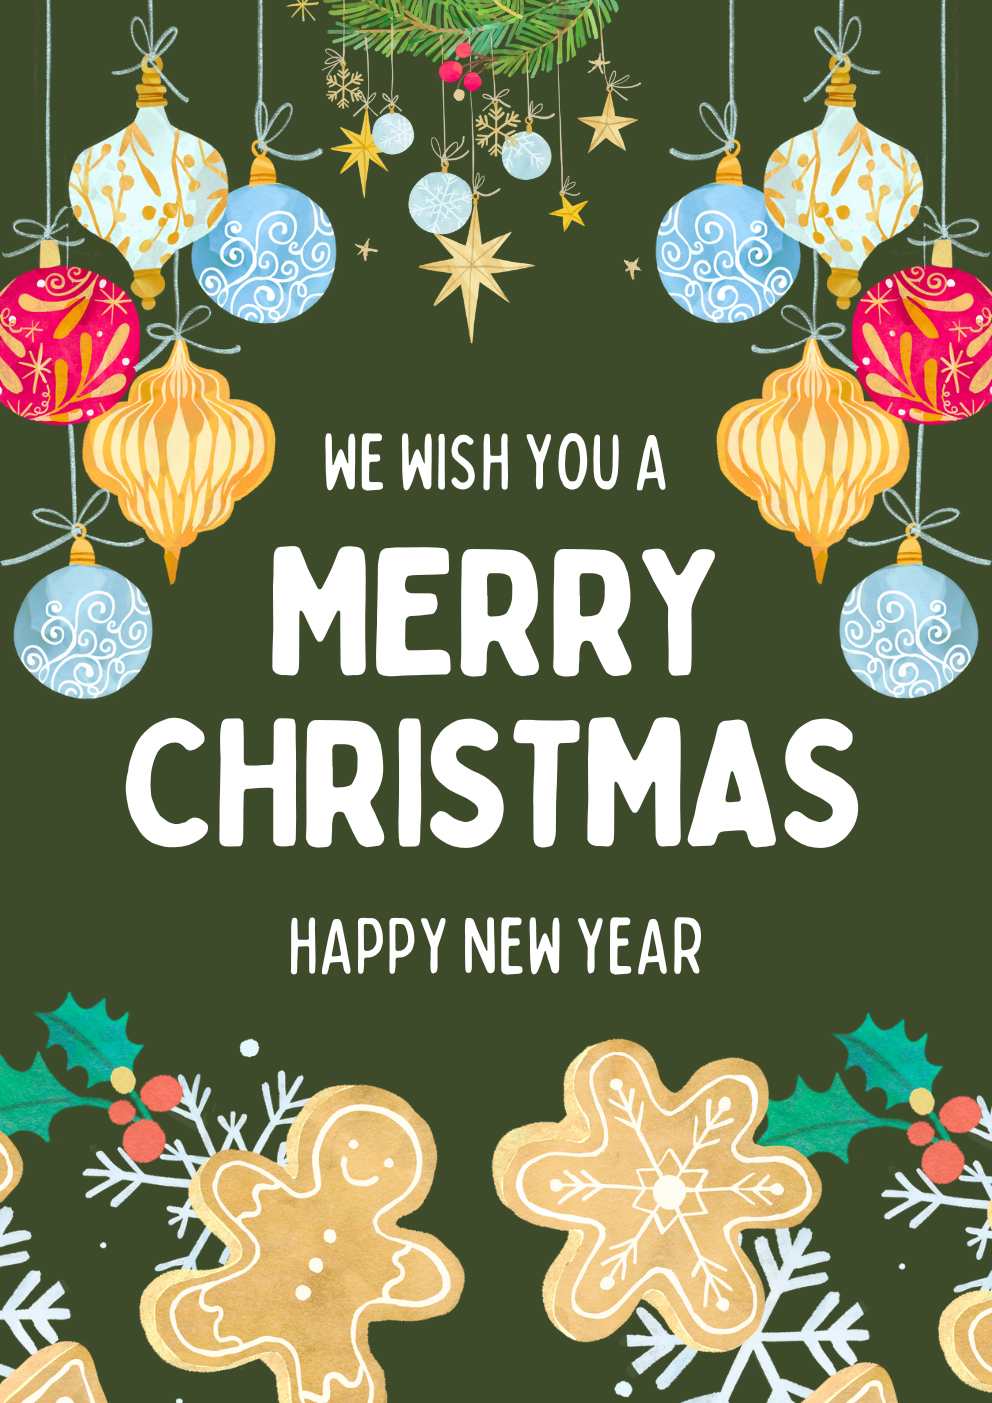 Merry Christmas & Happy New Year Wishes Images